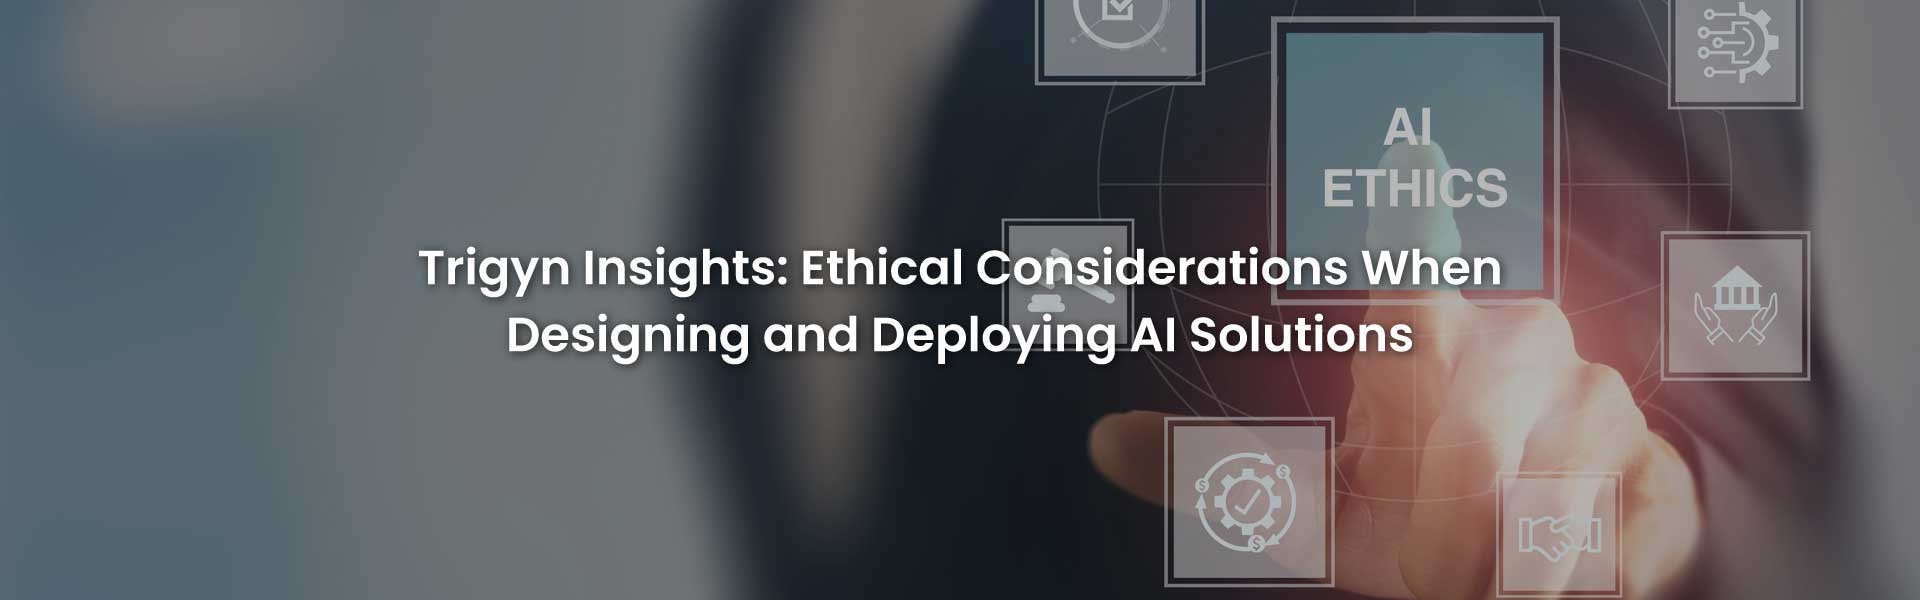 Ethics for Designing and Deploying AI Solutions